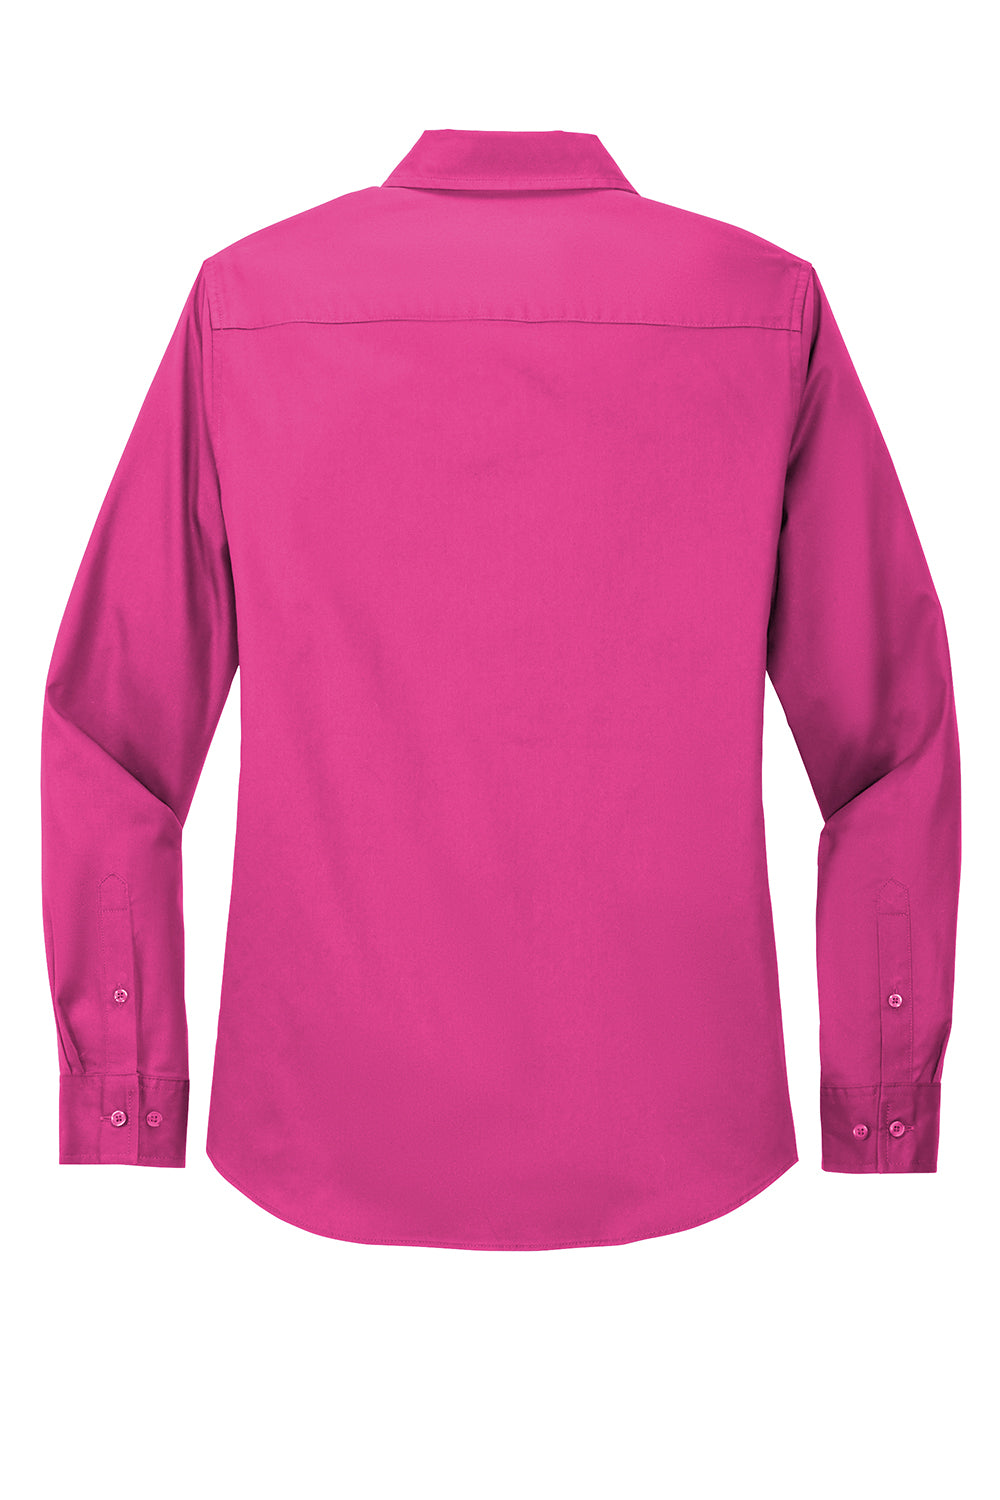 Port Authority L608 Womens Easy Care Wrinkle Resistant Long Sleeve Button Down Shirt Tropical Pink Flat Back